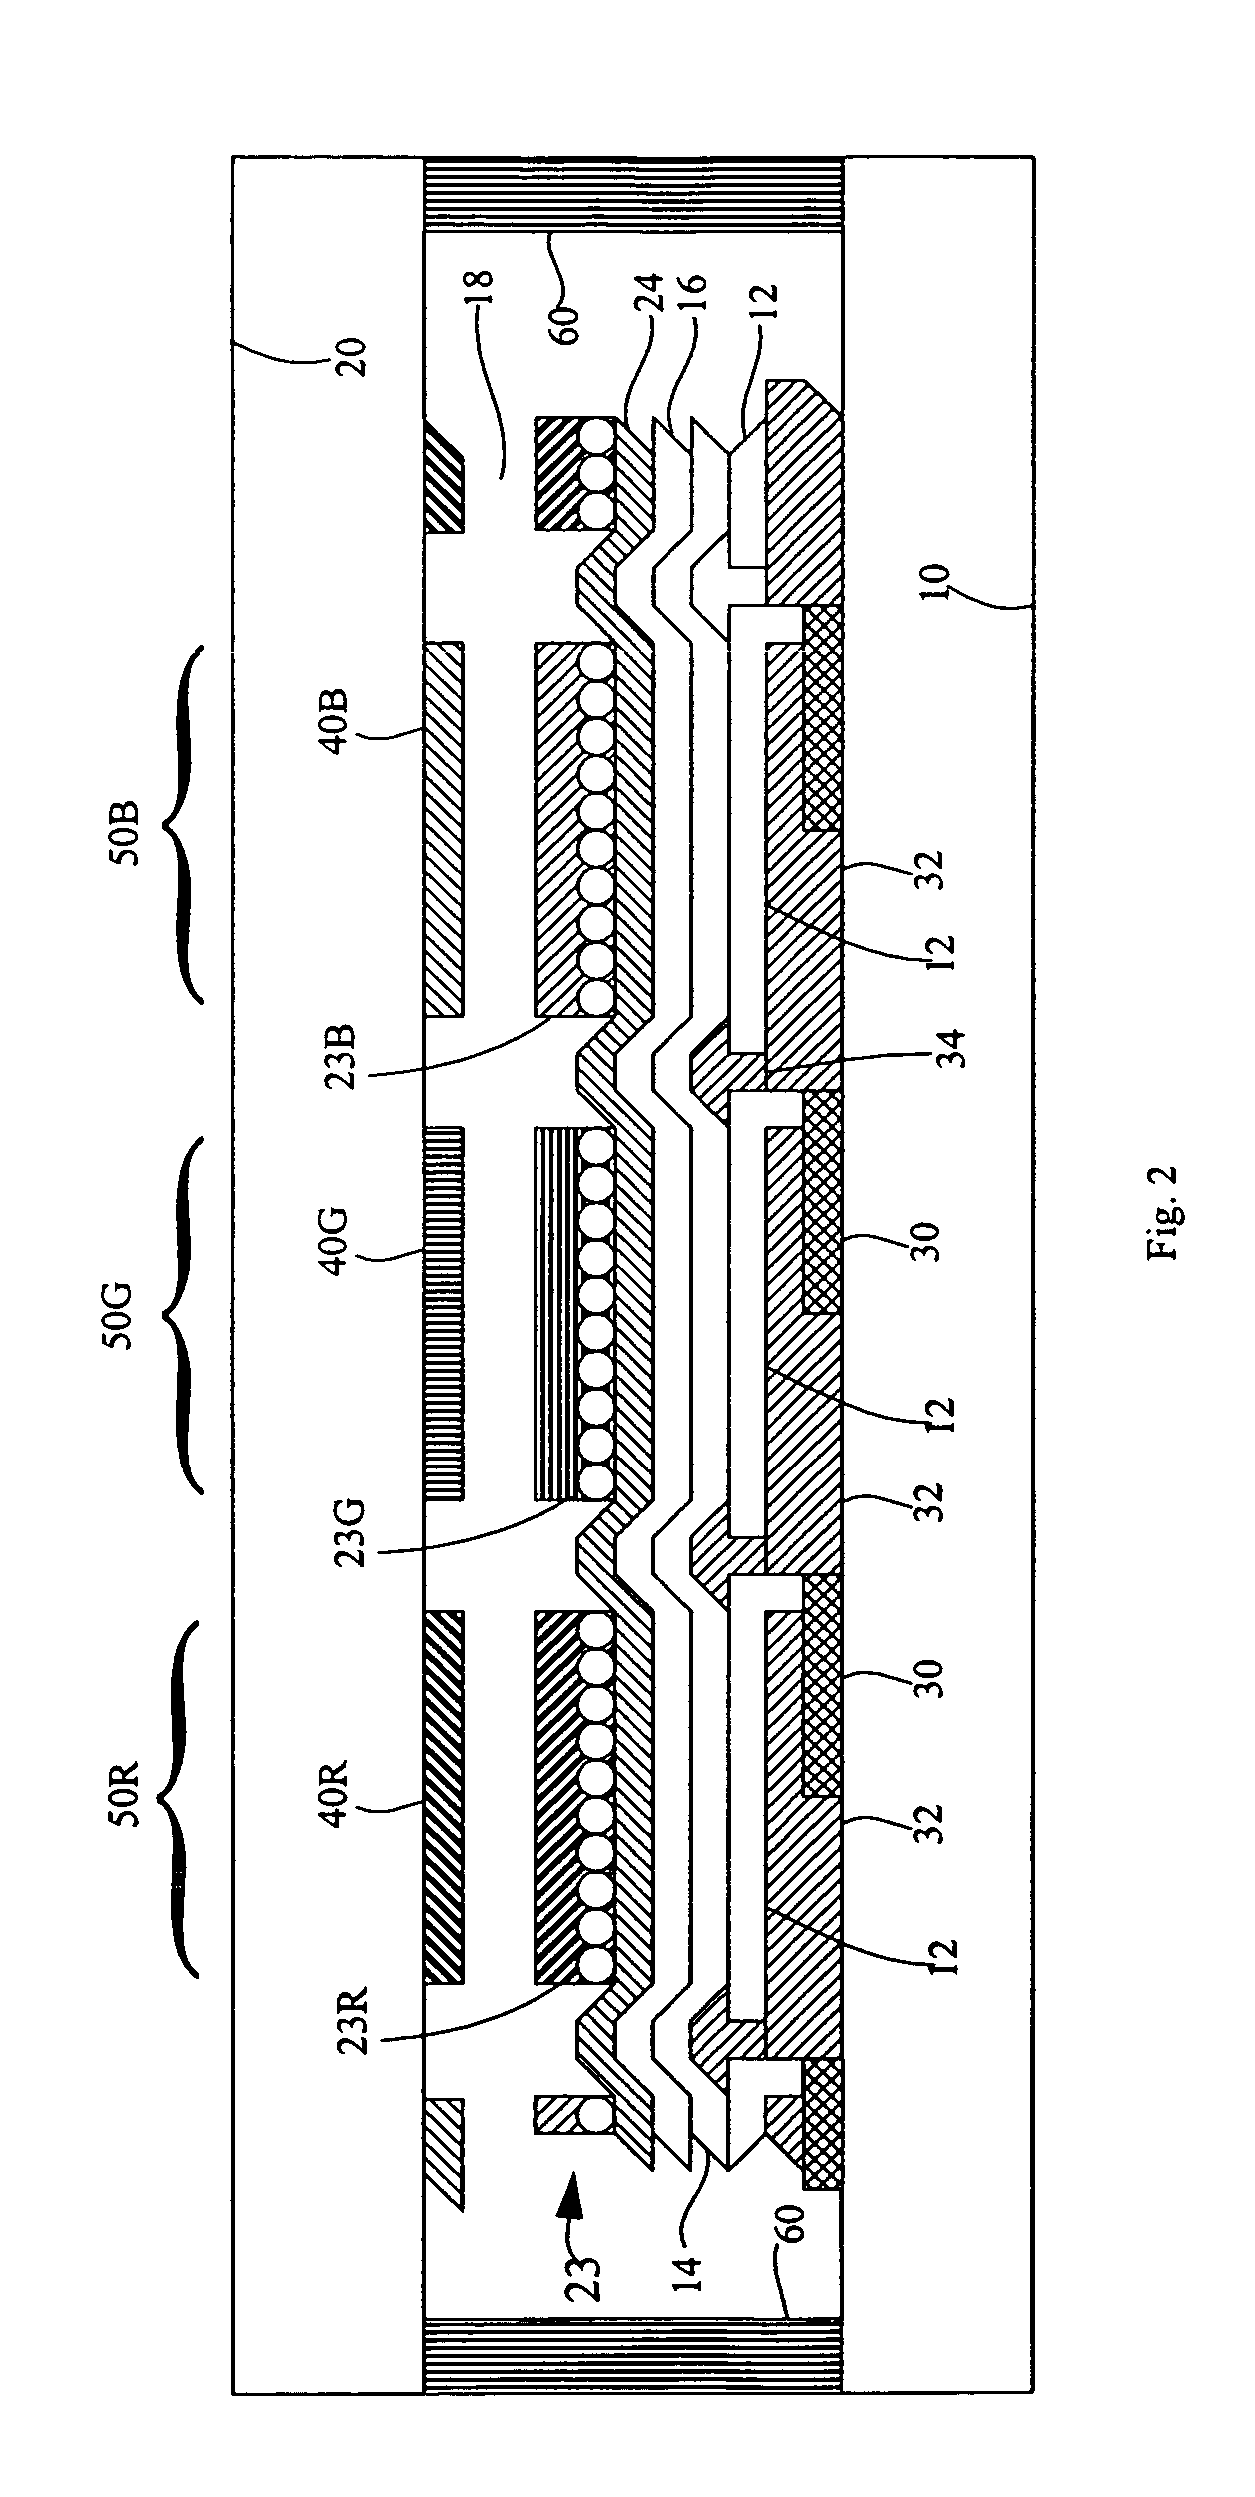 Light-scattering color-conversion material layer